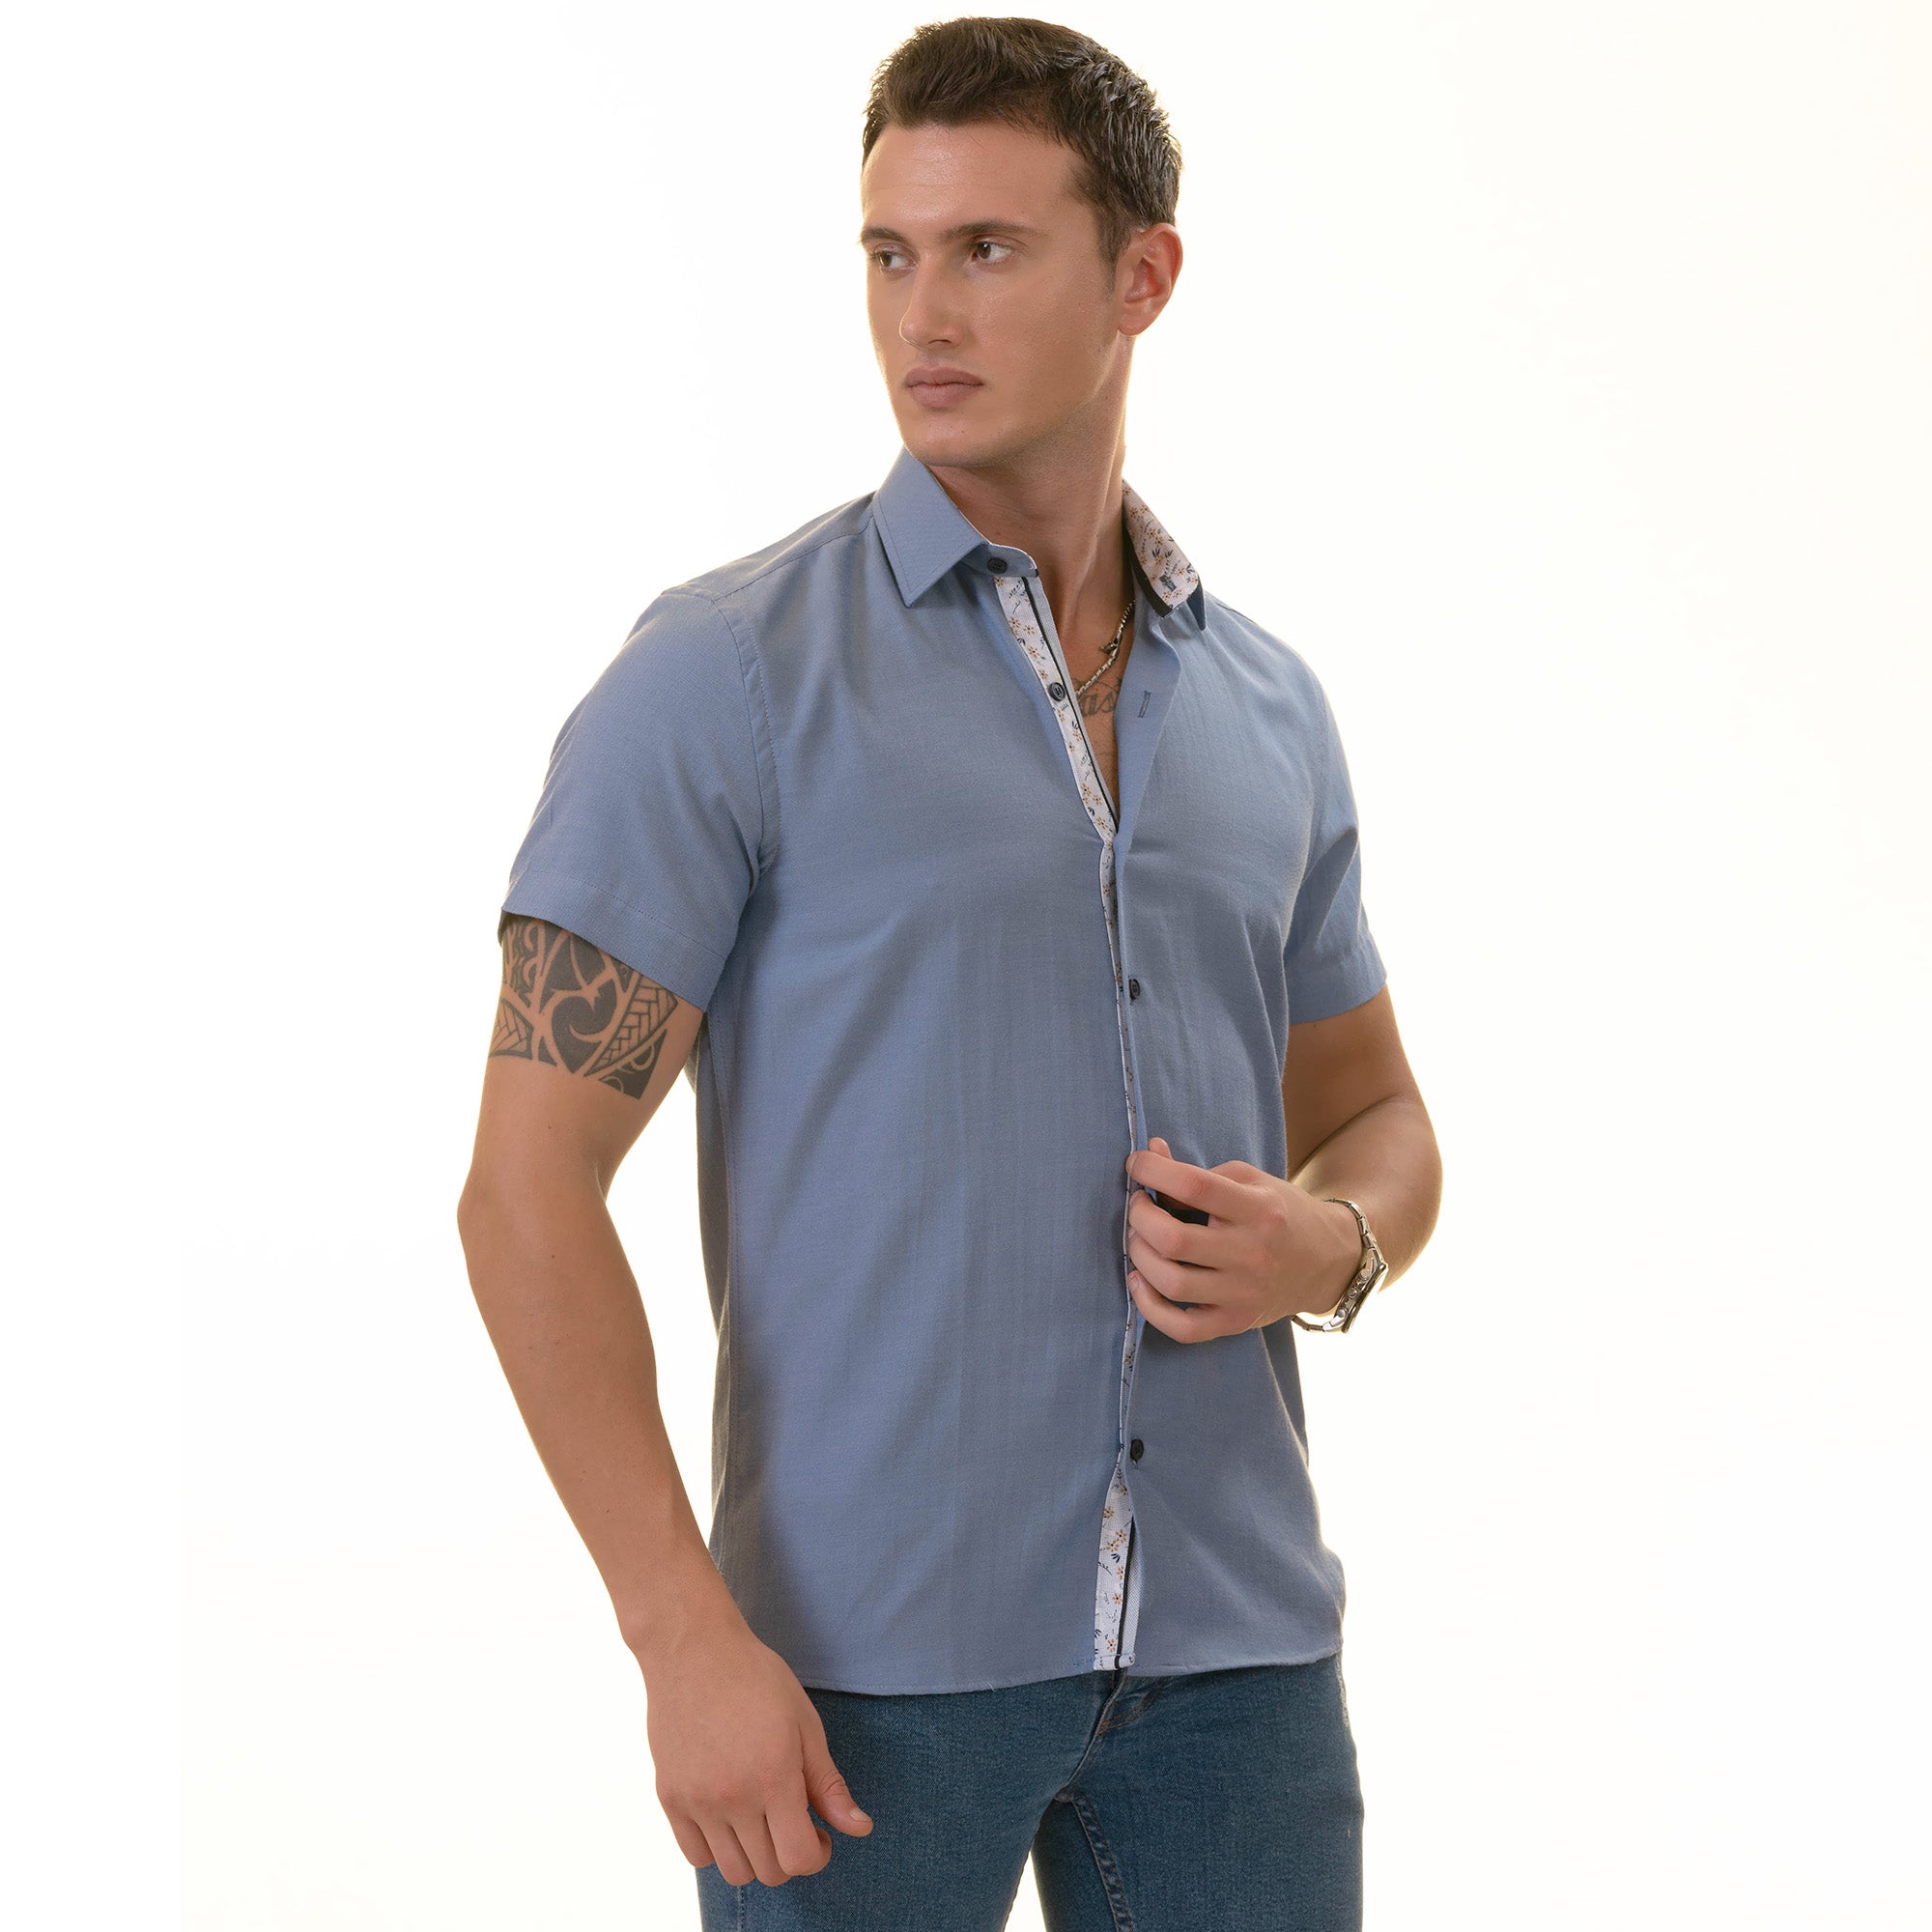 Blue Oxford inside Floral Paisley  Short Sleeve Button up Shirts - Tailored Slim Fit Cotton Dress Shirts